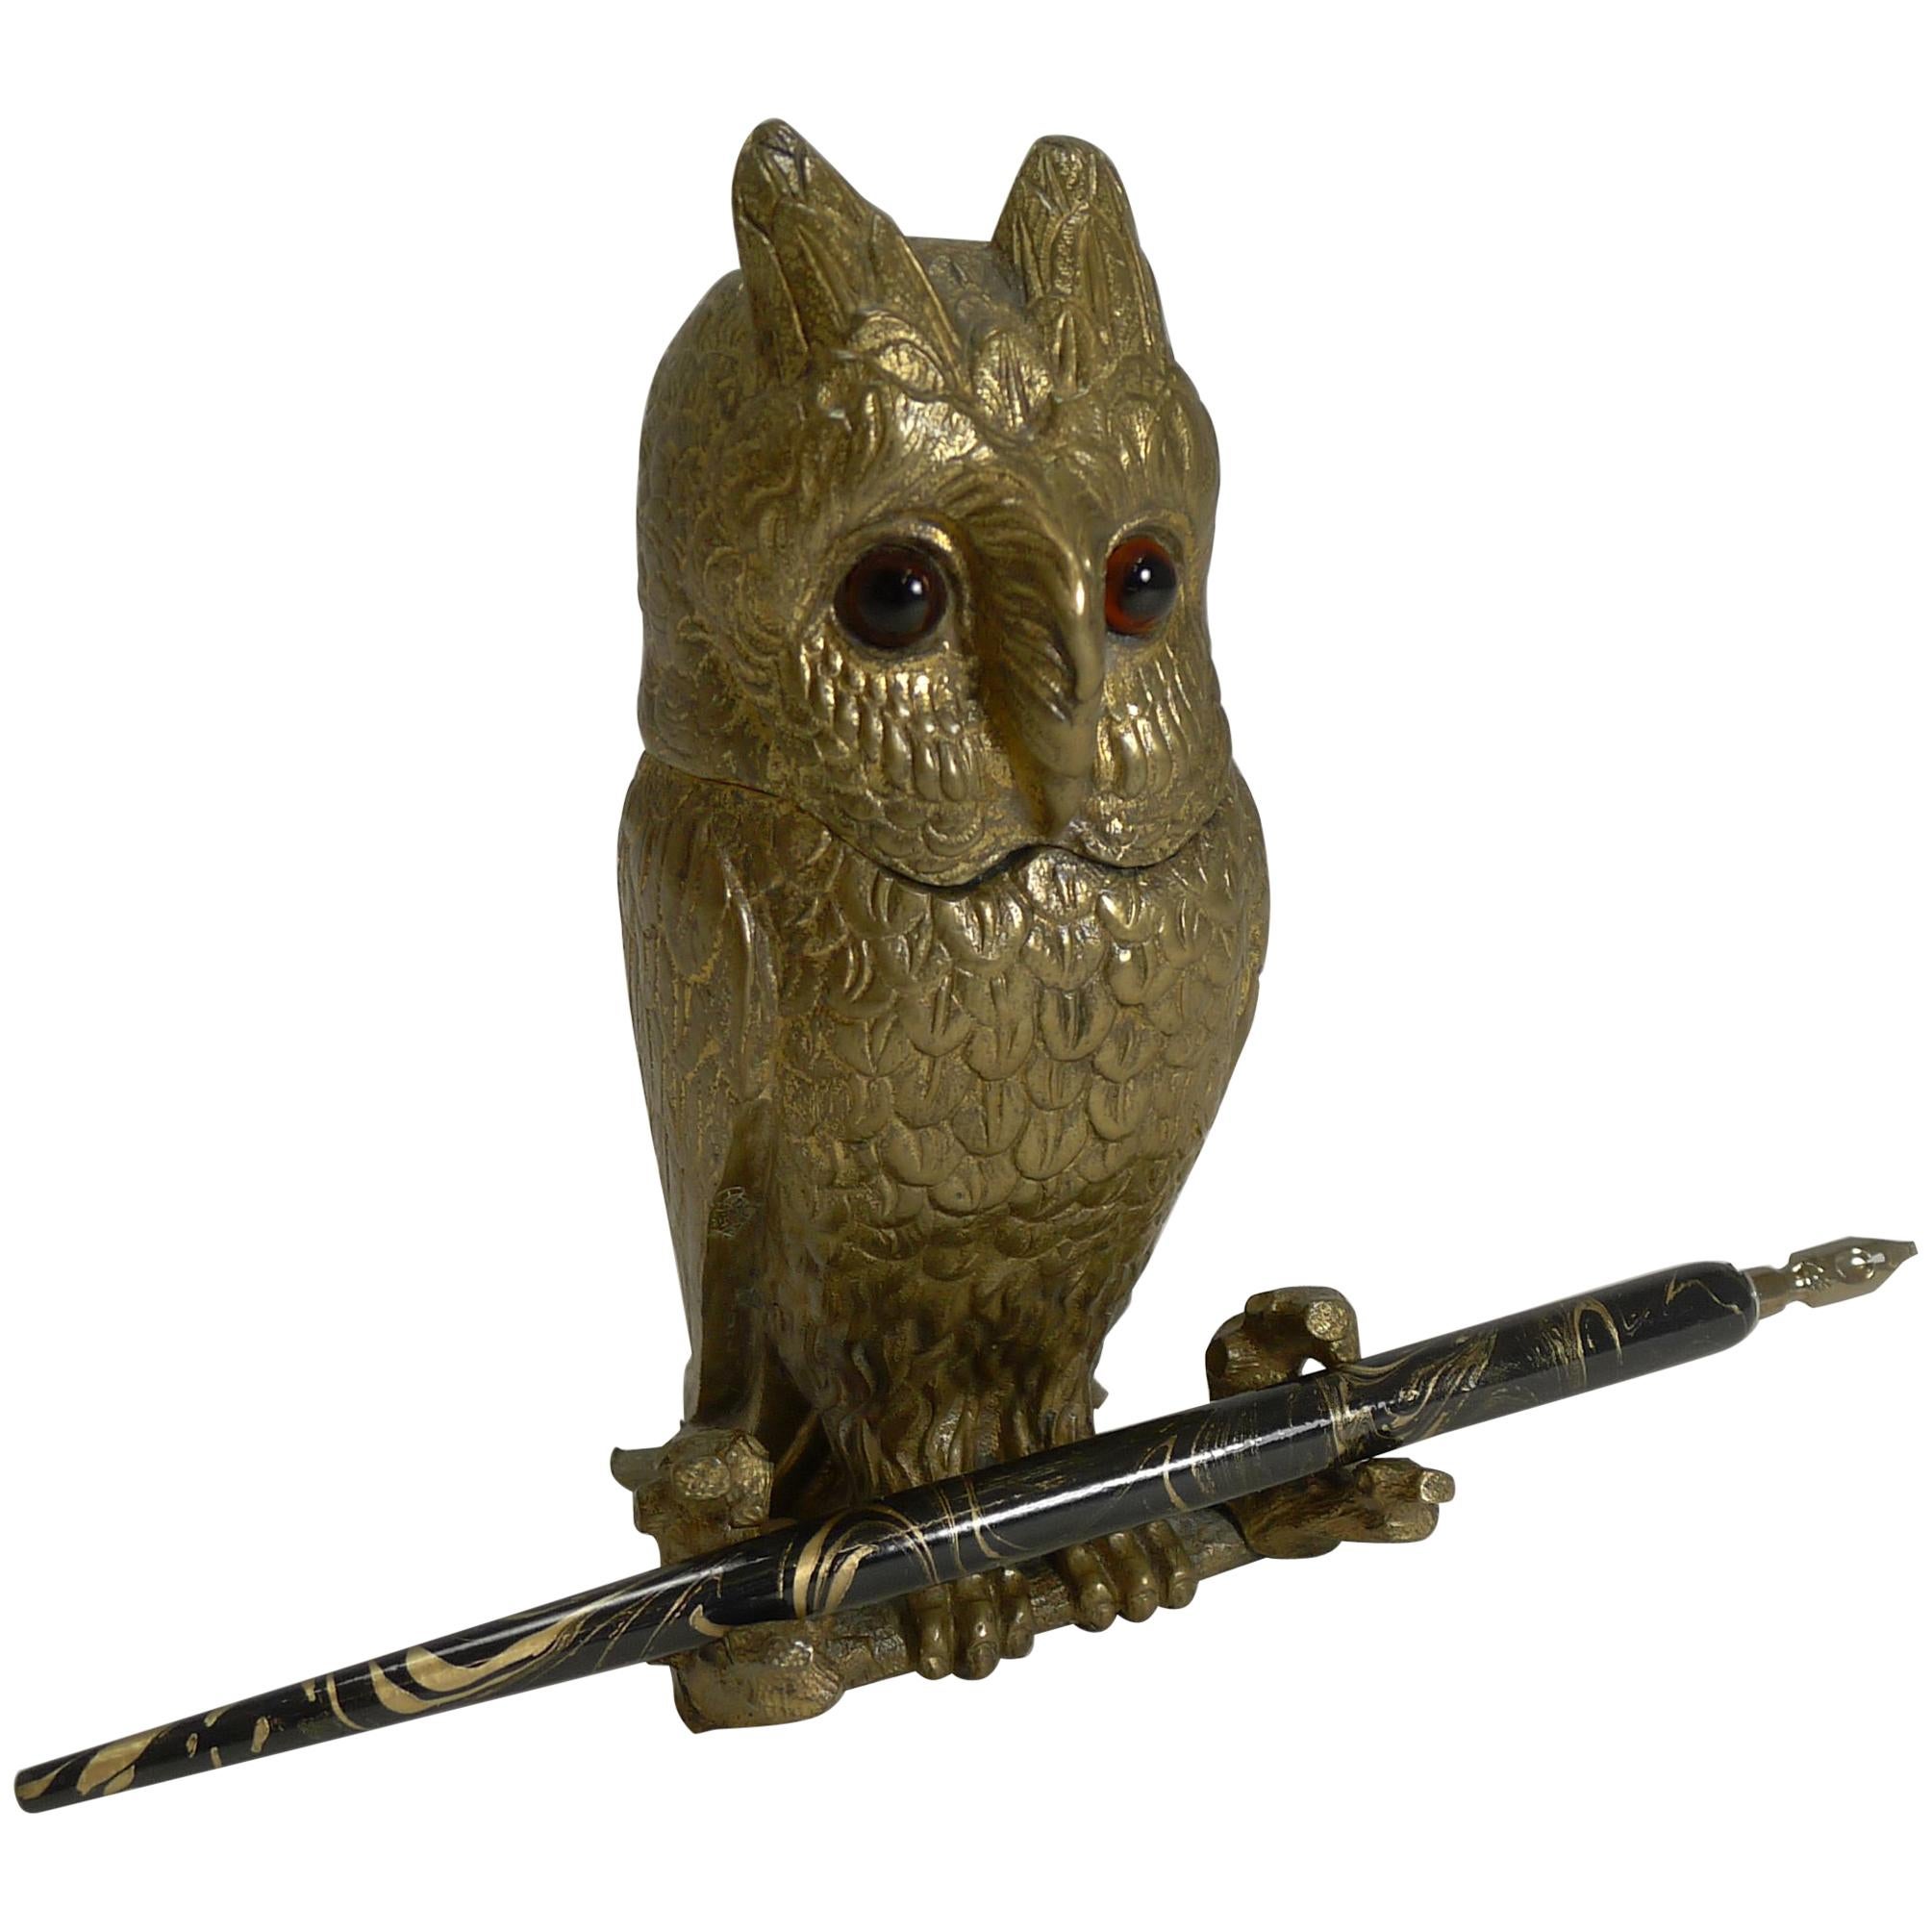 Antique Novelty Inkwell, Gilded Bronze Owl with Glass Eyes